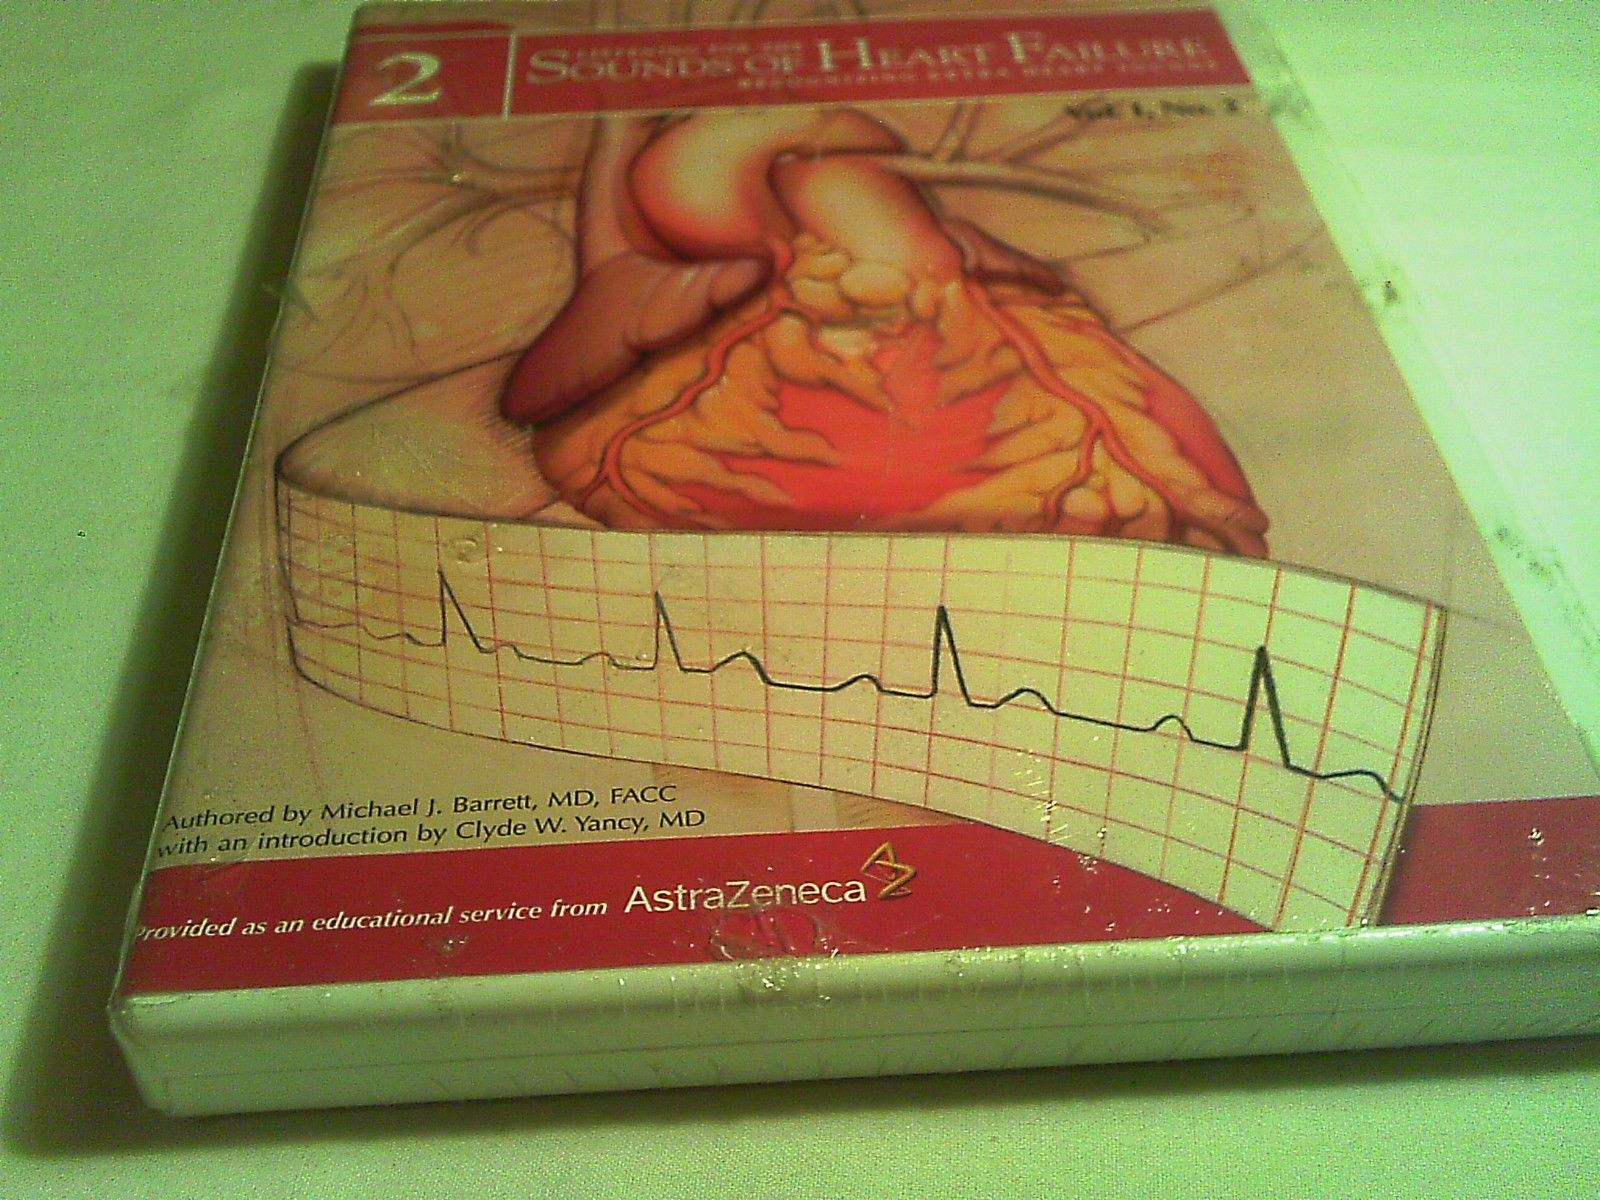 [H2] *SCARCE* CD SOUNDS OF HEART FAILURE Vol 1 #2 Recognizing Extra Heart Sounds - $35.88